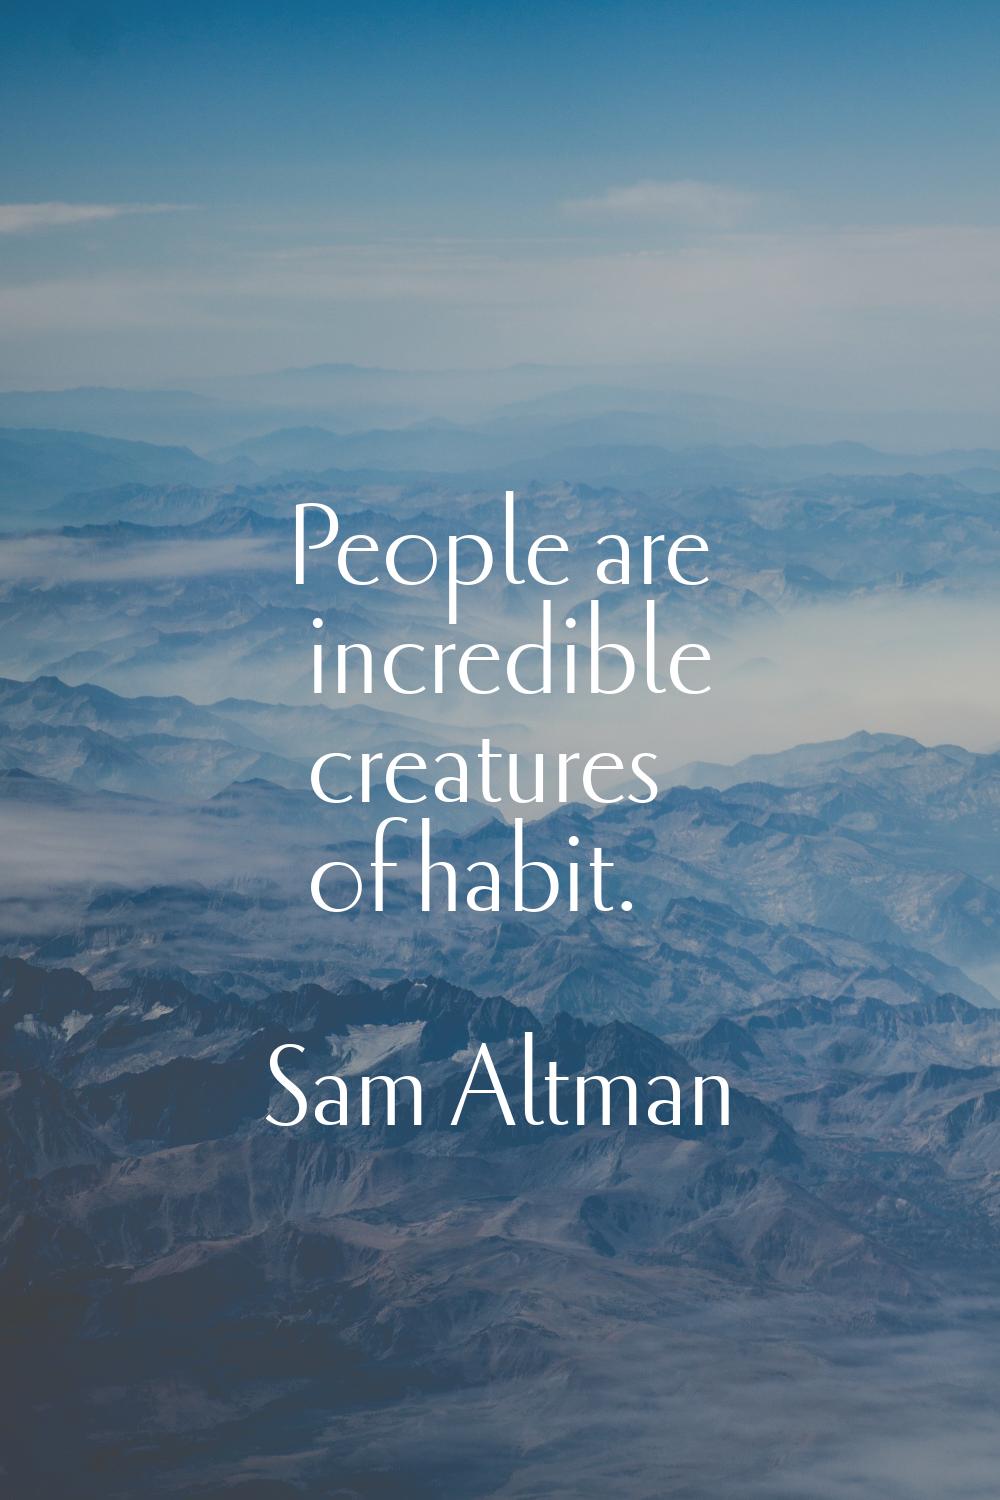 People are incredible creatures of habit.